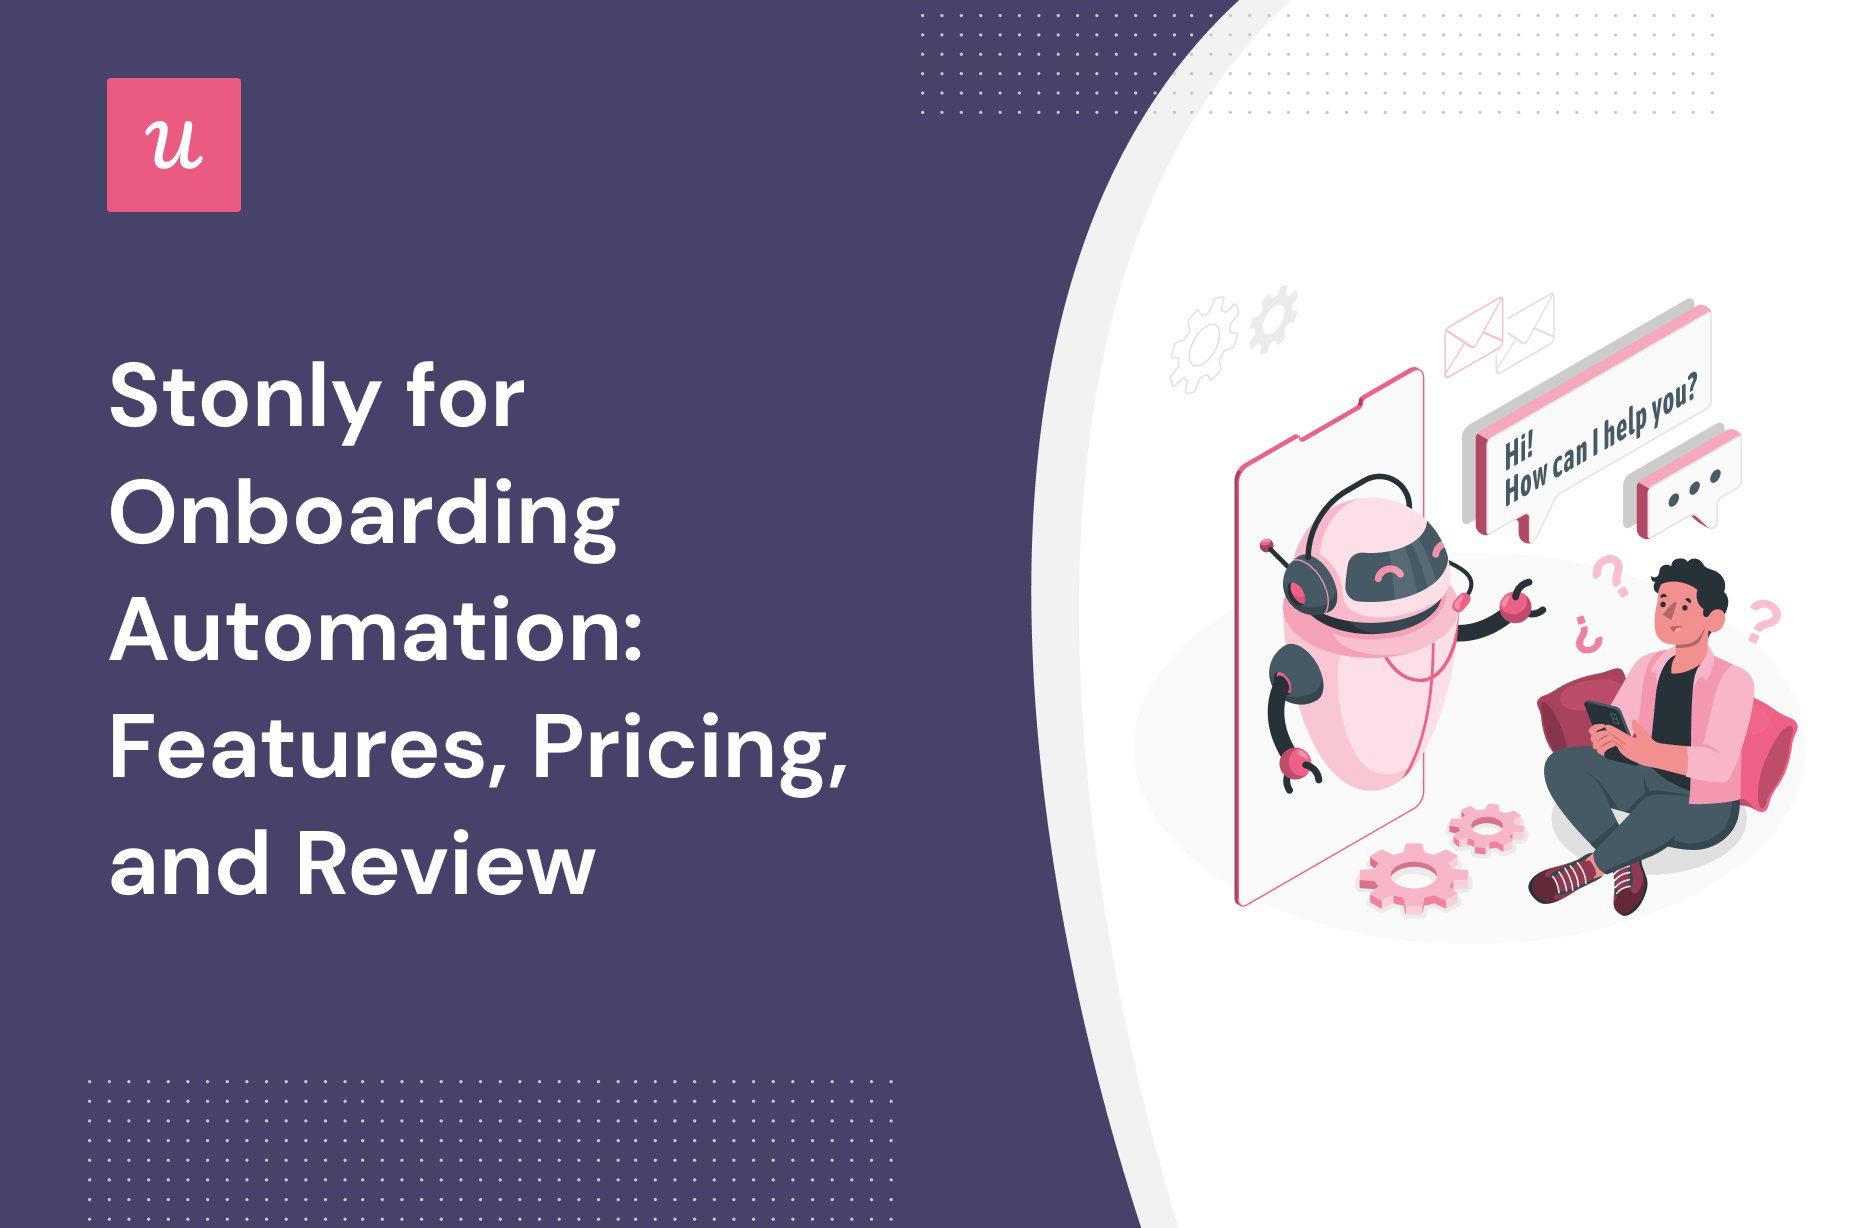 Stonly for Onboarding Automation: Features, Pricing, and Review